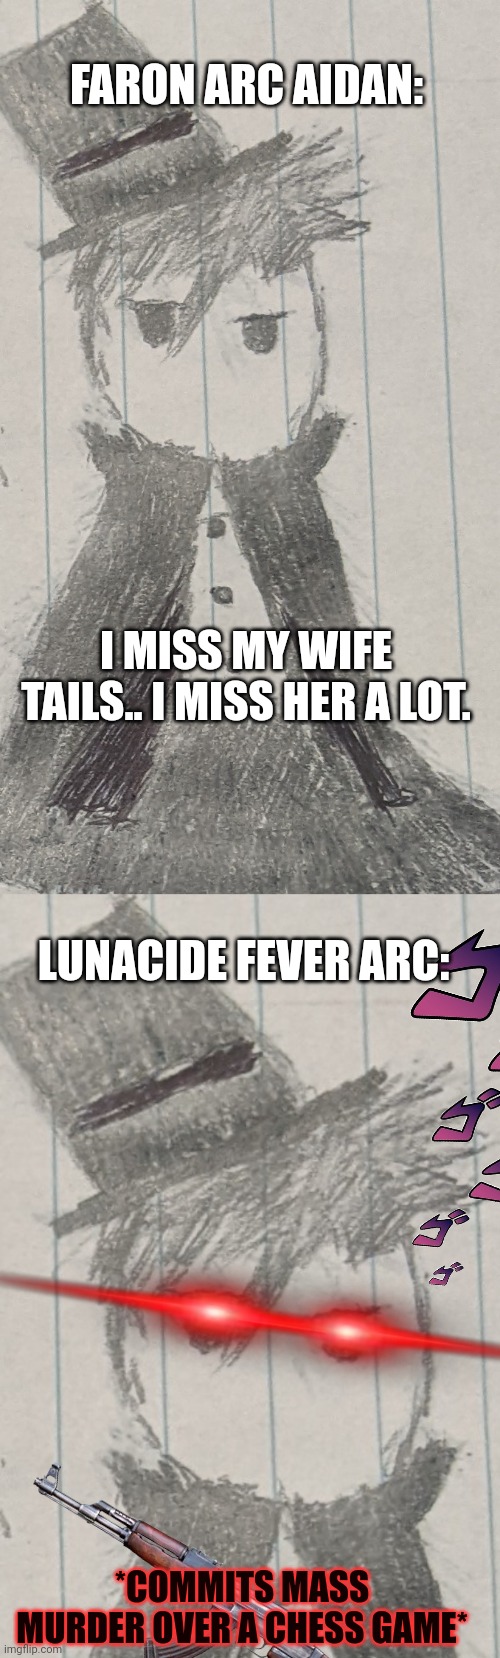 First hand drawn meme of mine, yeet! | FARON ARC AIDAN:; I MISS MY WIFE TAILS.. I MISS HER A LOT. LUNACIDE FEVER ARC:; *COMMITS MASS MURDER OVER A CHESS GAME* | image tagged in aidan | made w/ Imgflip meme maker